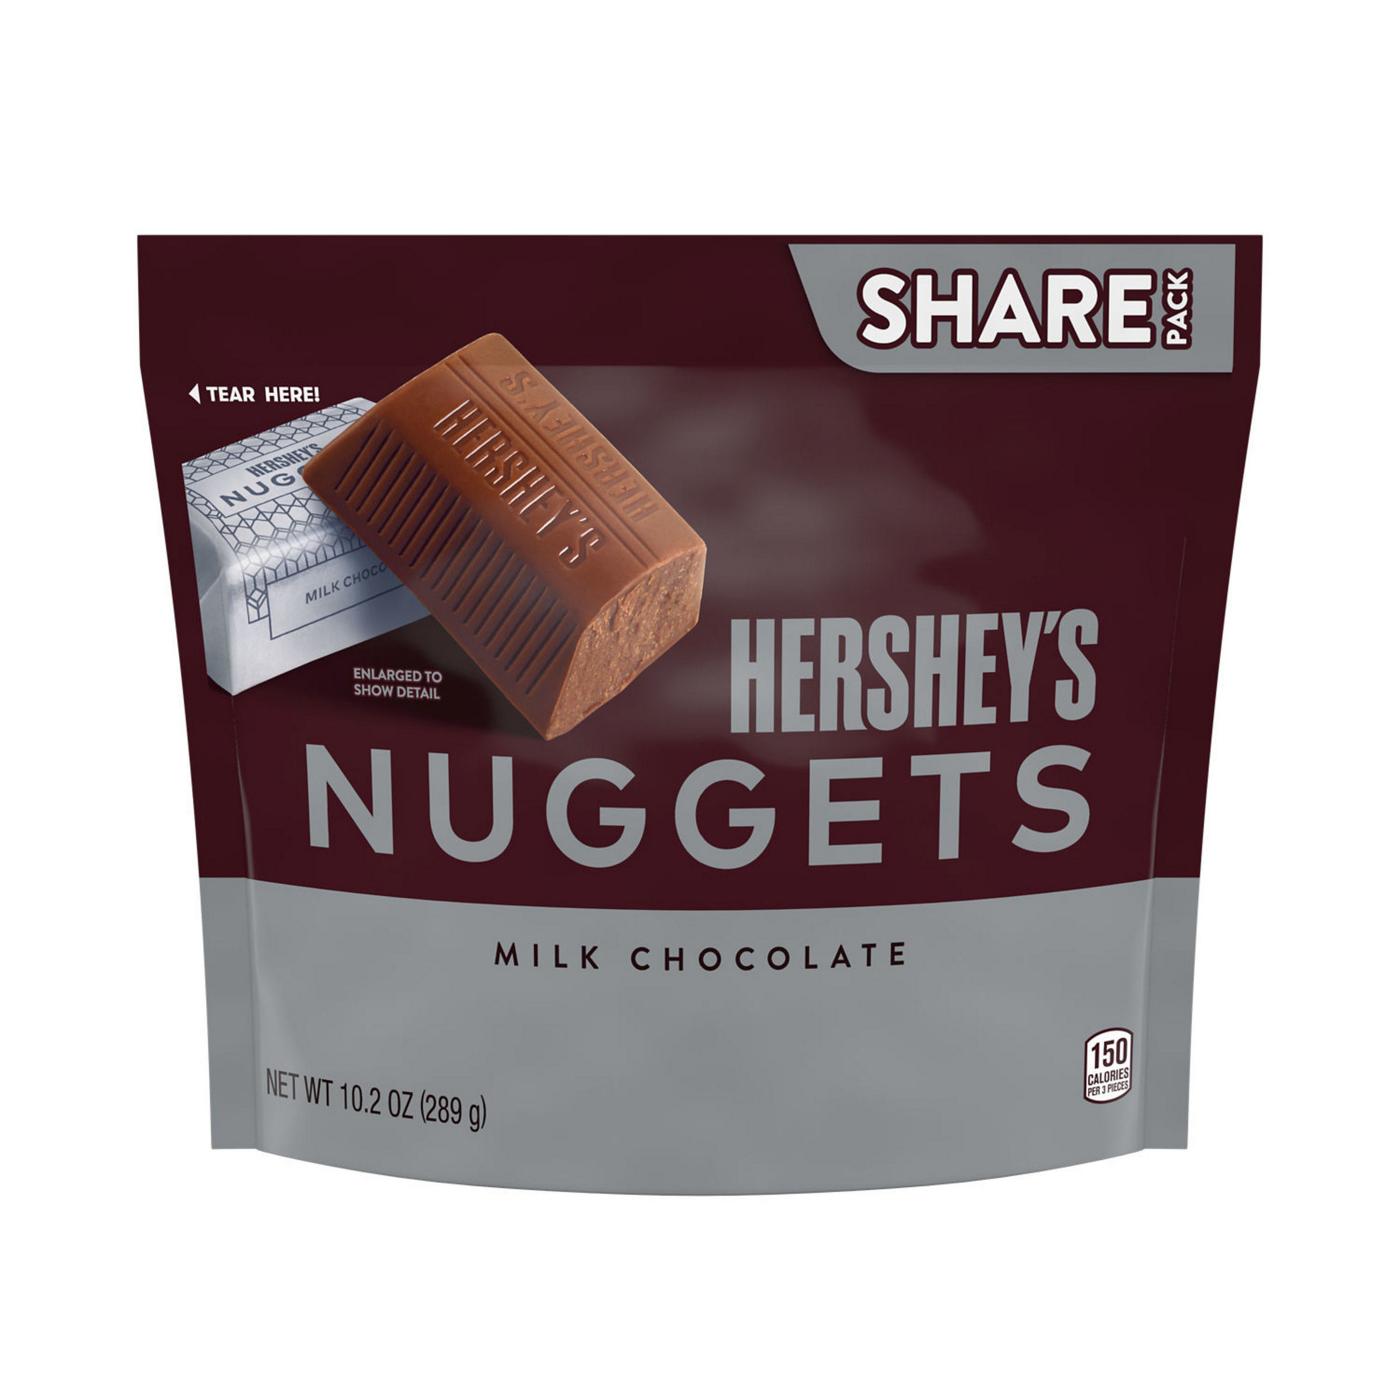 Hershey's Nuggets Milk Chocolate Candy - Share Pack; image 1 of 7